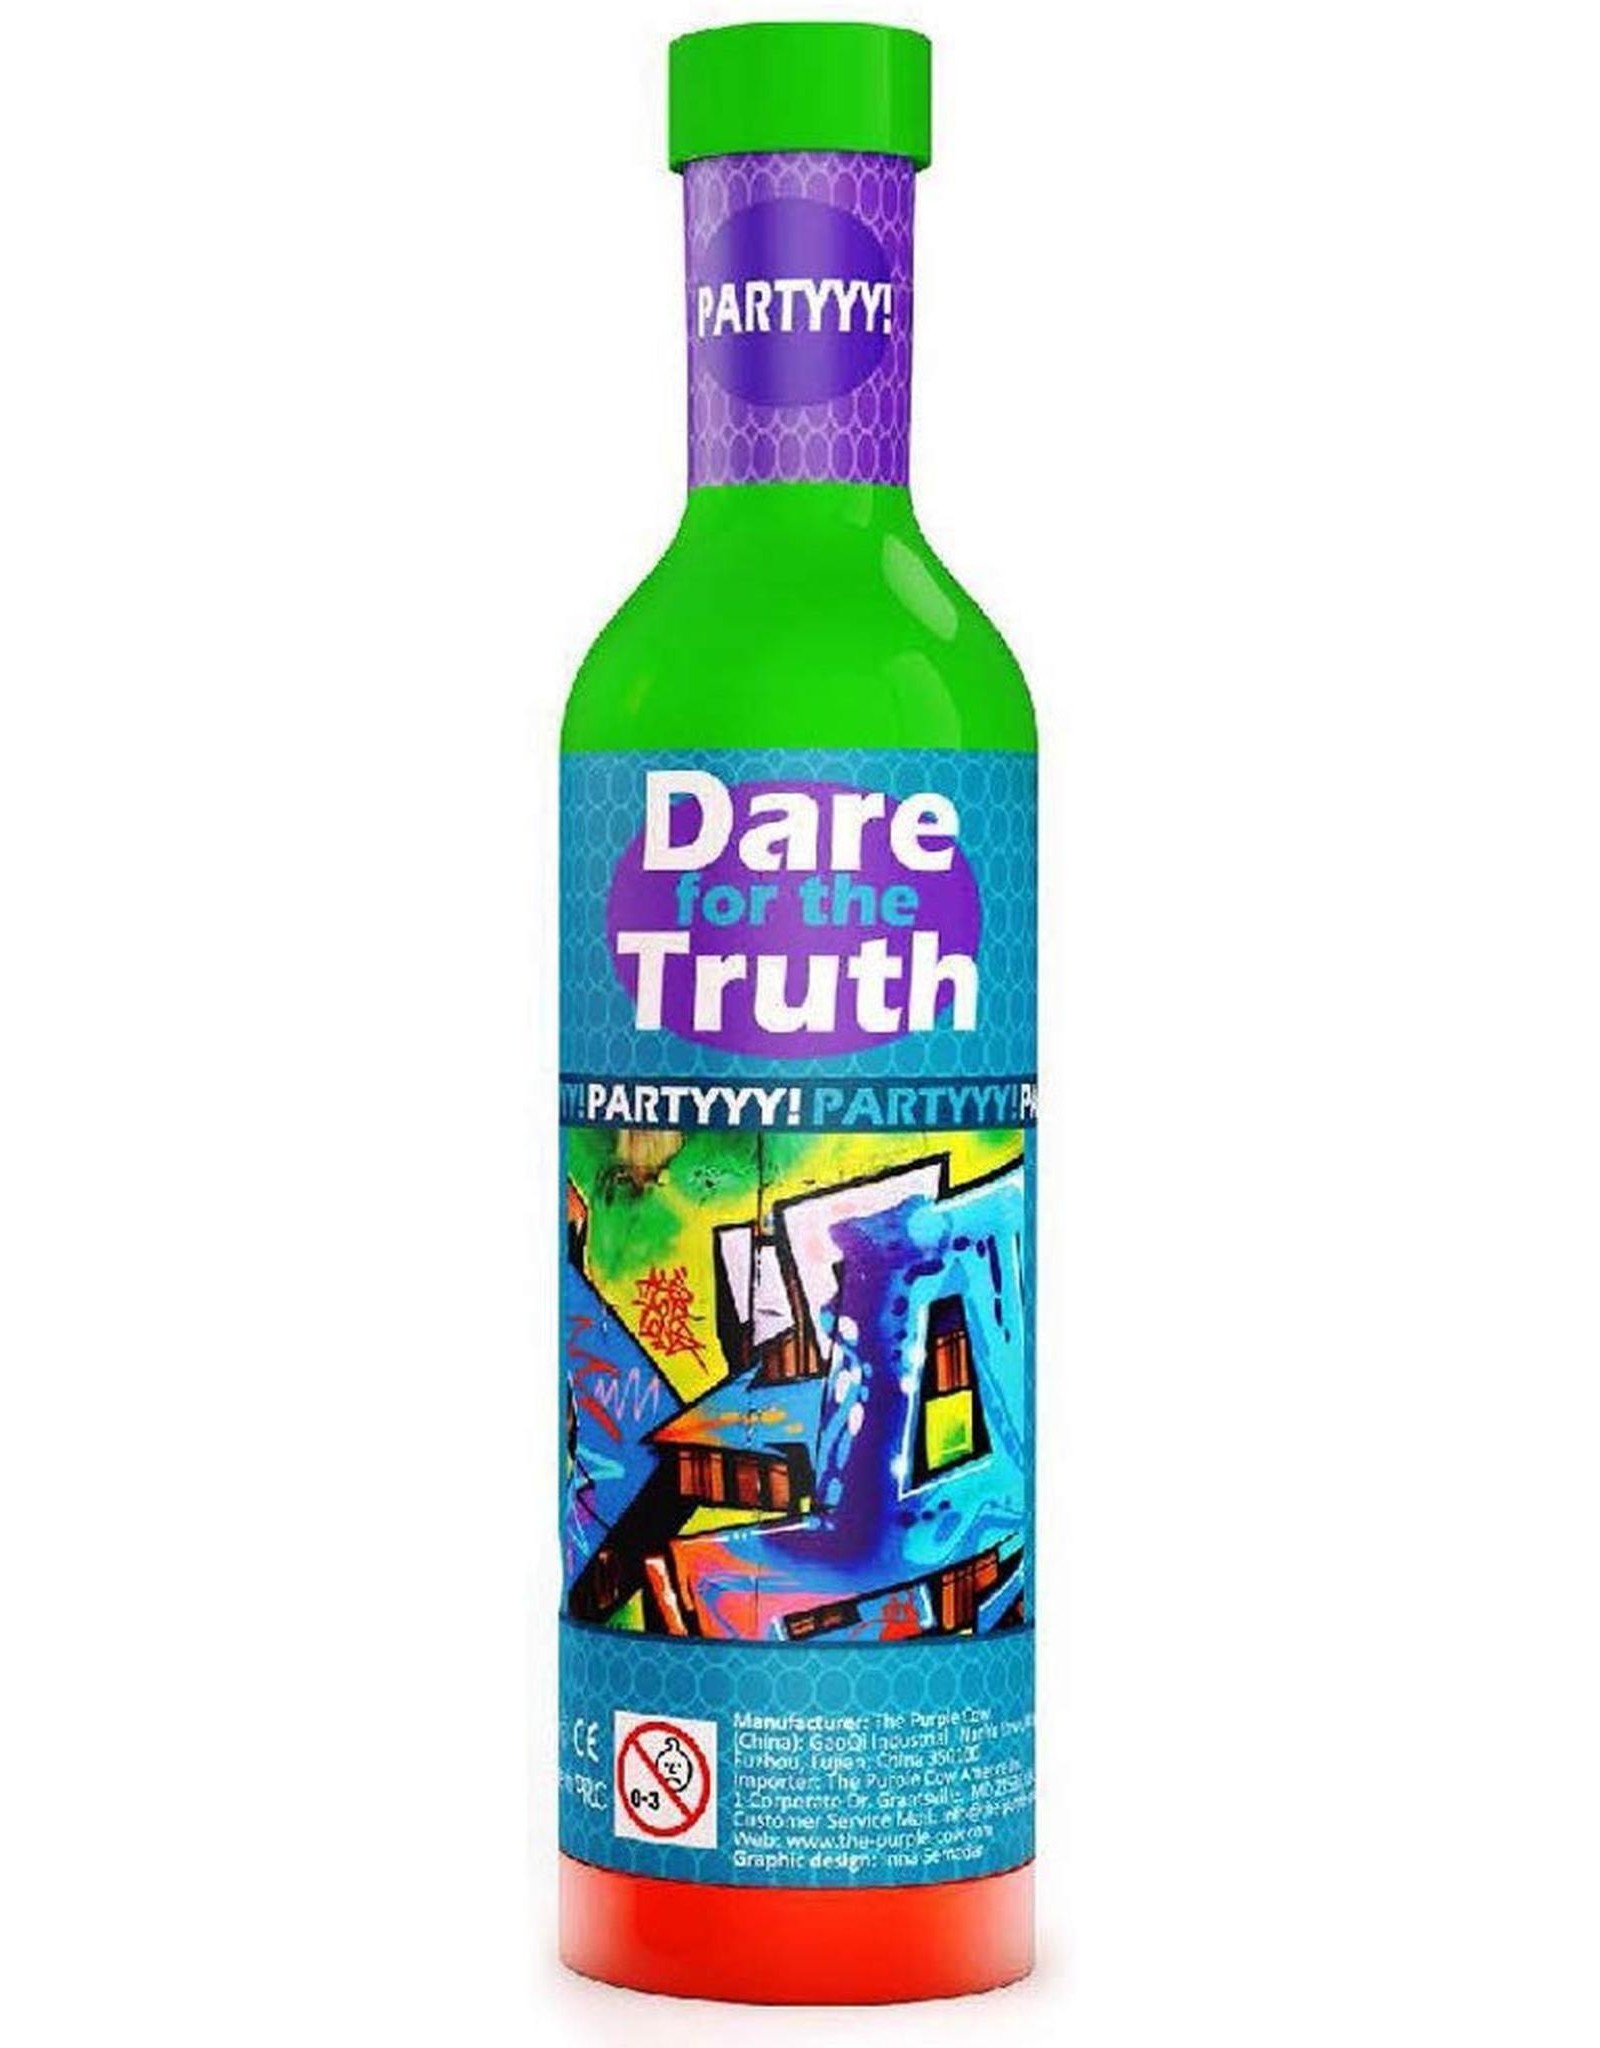 Dare For the Truth Partyyy!